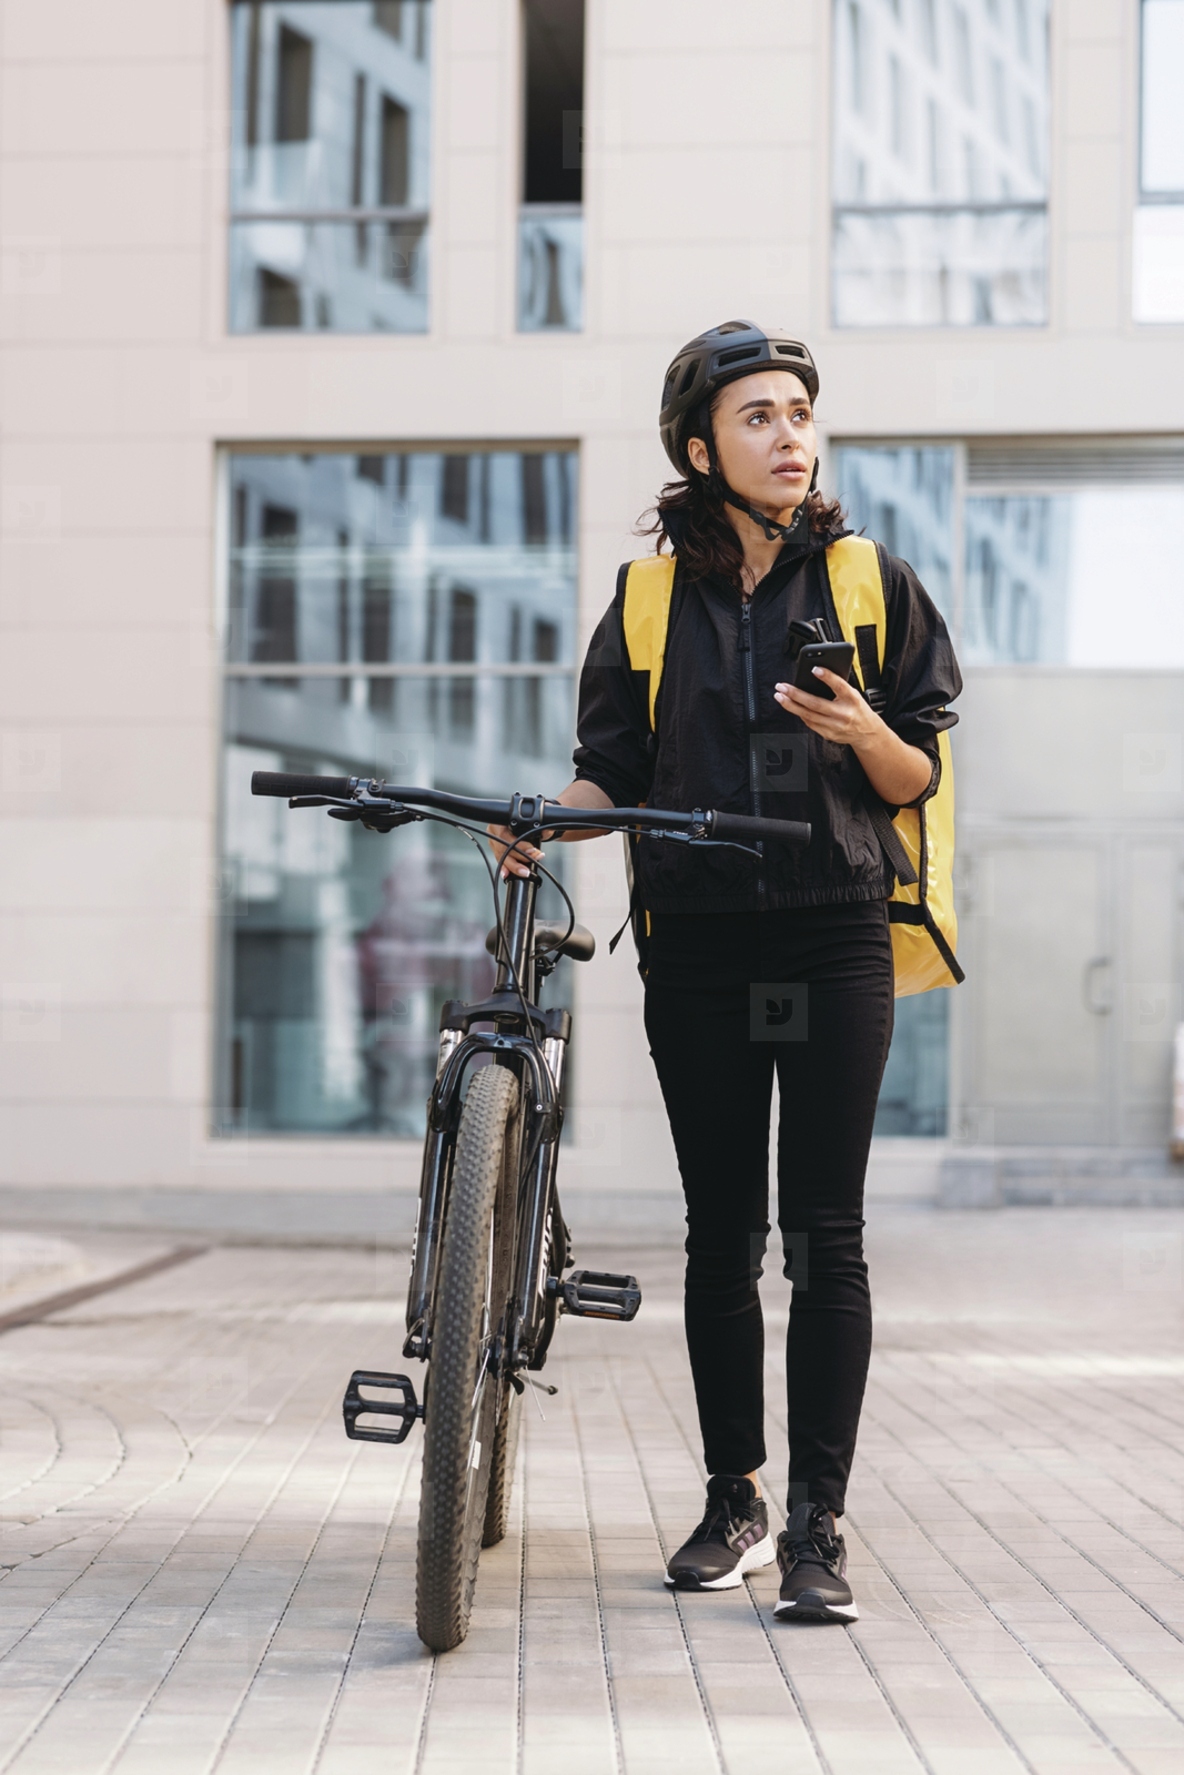 Woman courier walking on a city street with bicycle  holding mobile phone looking away